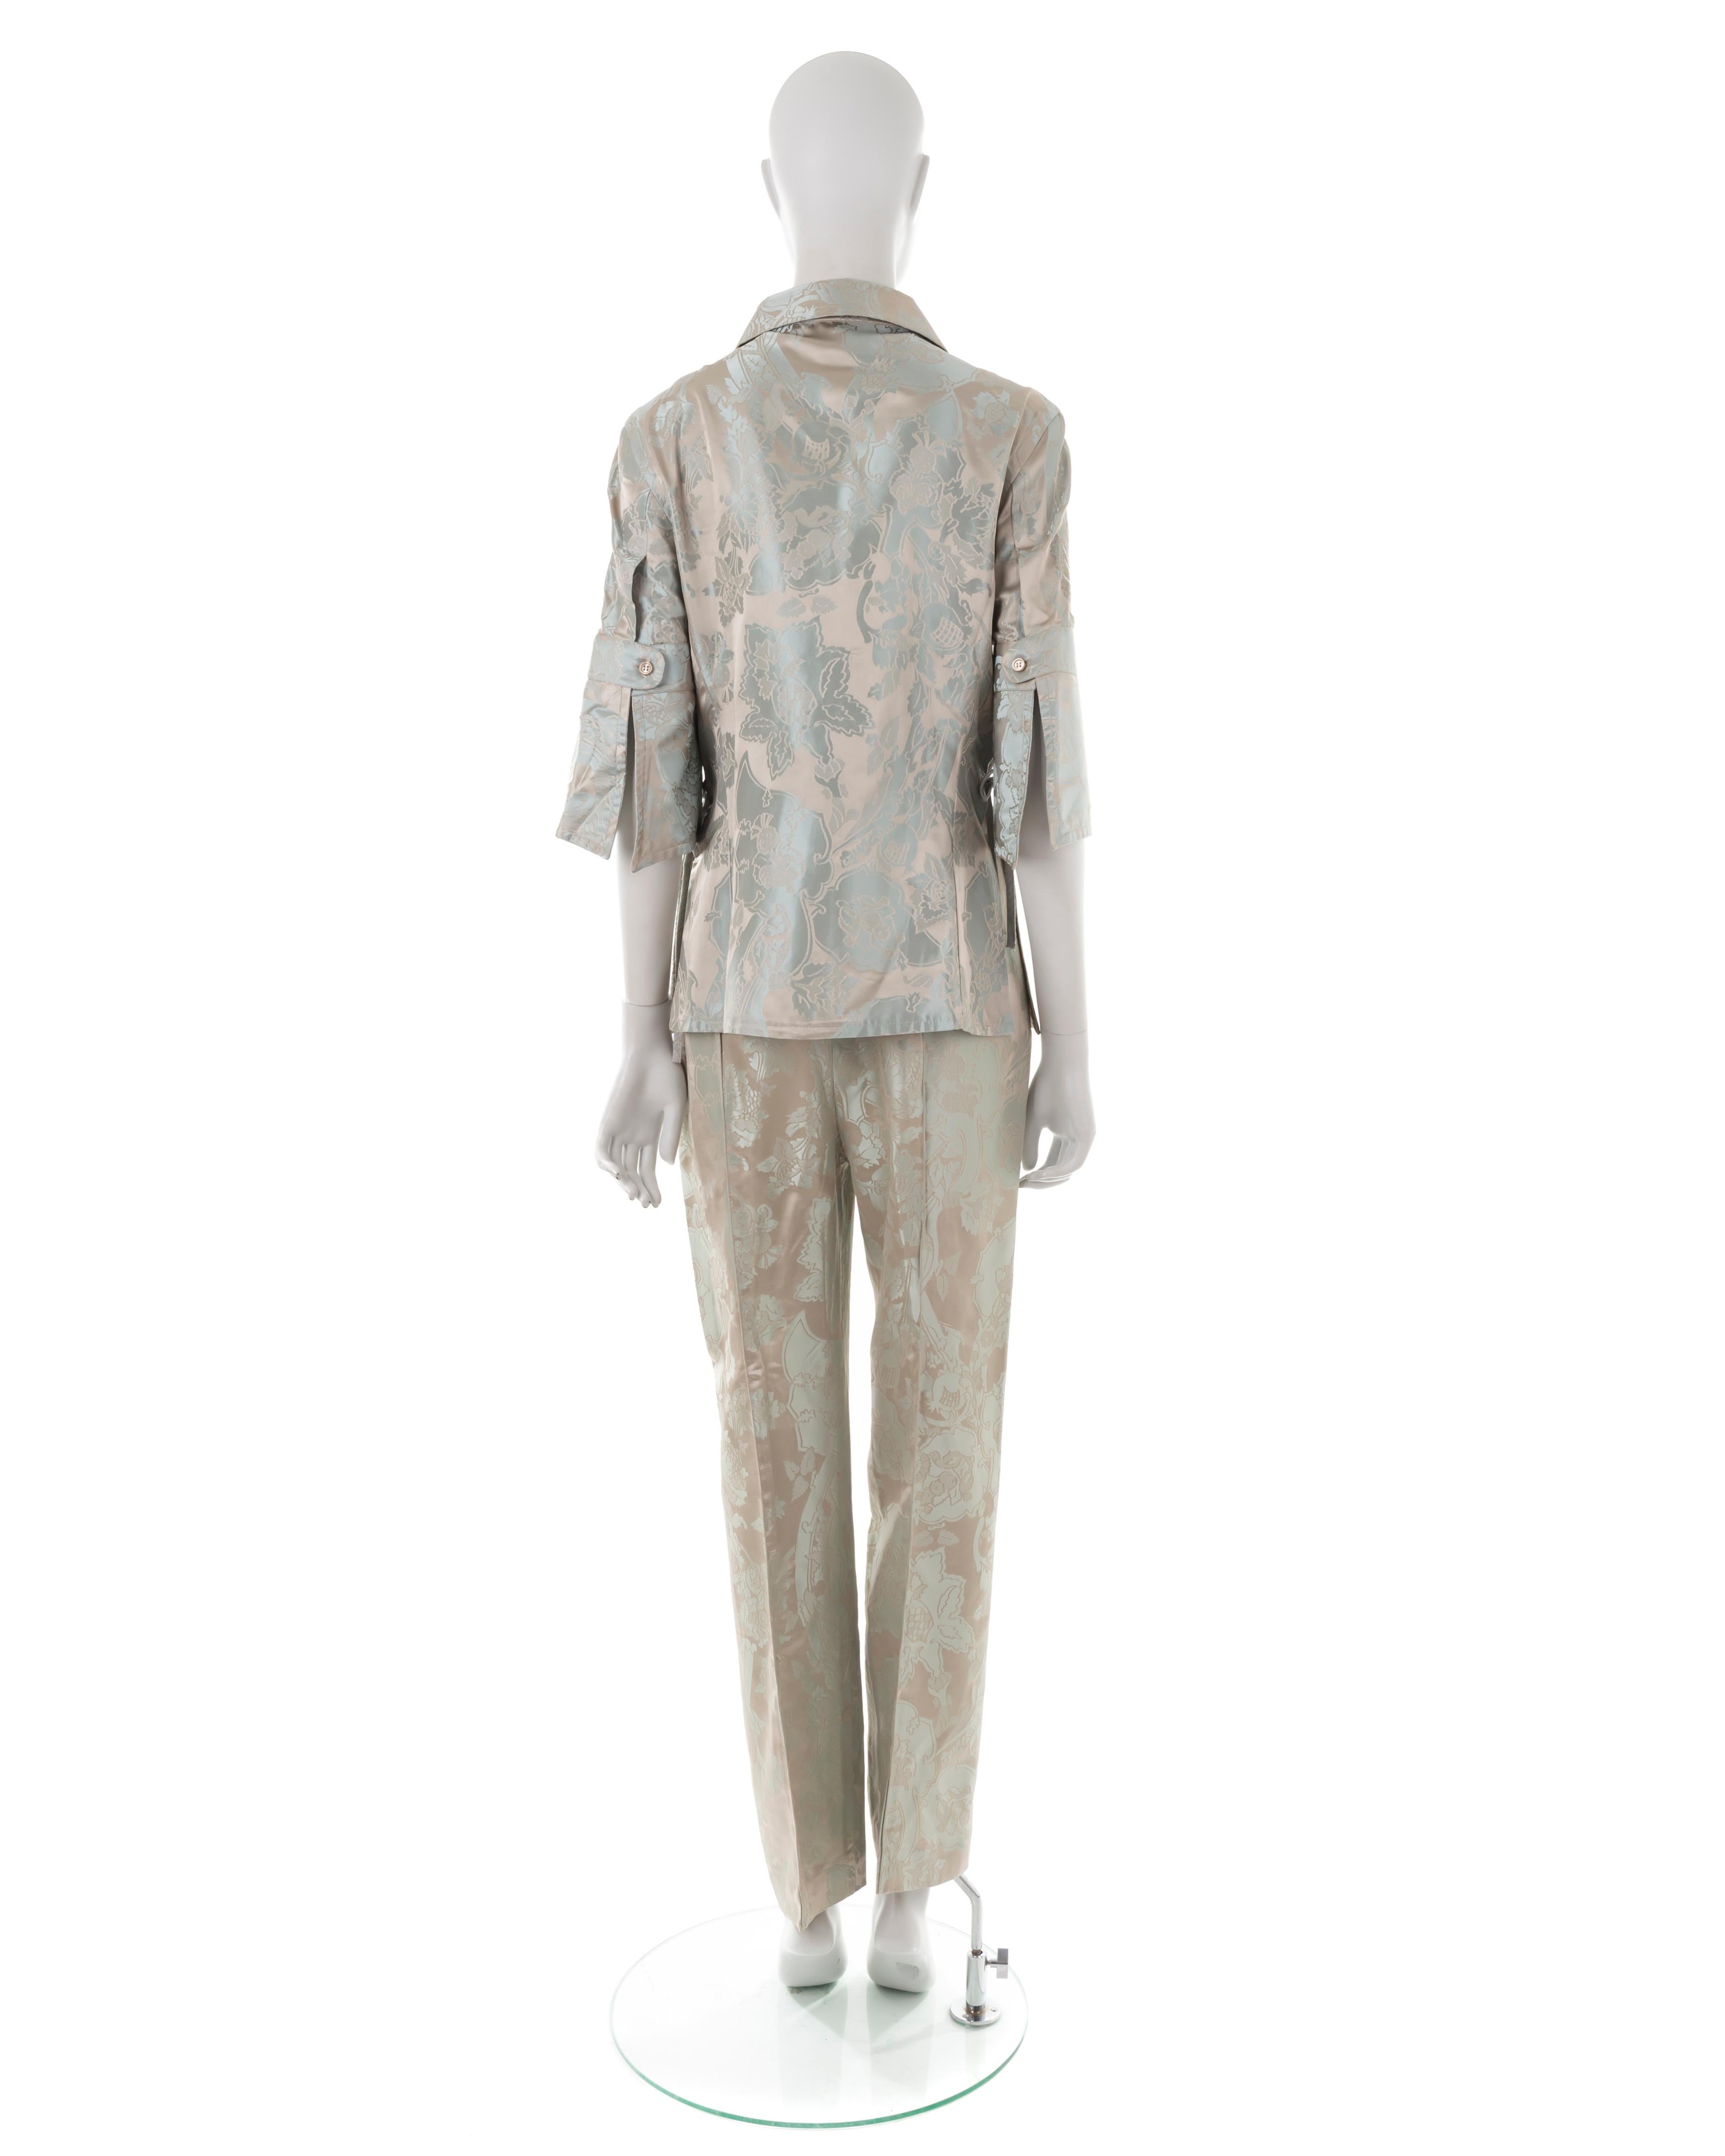 Gianfranco Ferrè S/S 2000 silver jacquard embroidered suit In Excellent Condition For Sale In Rome, IT